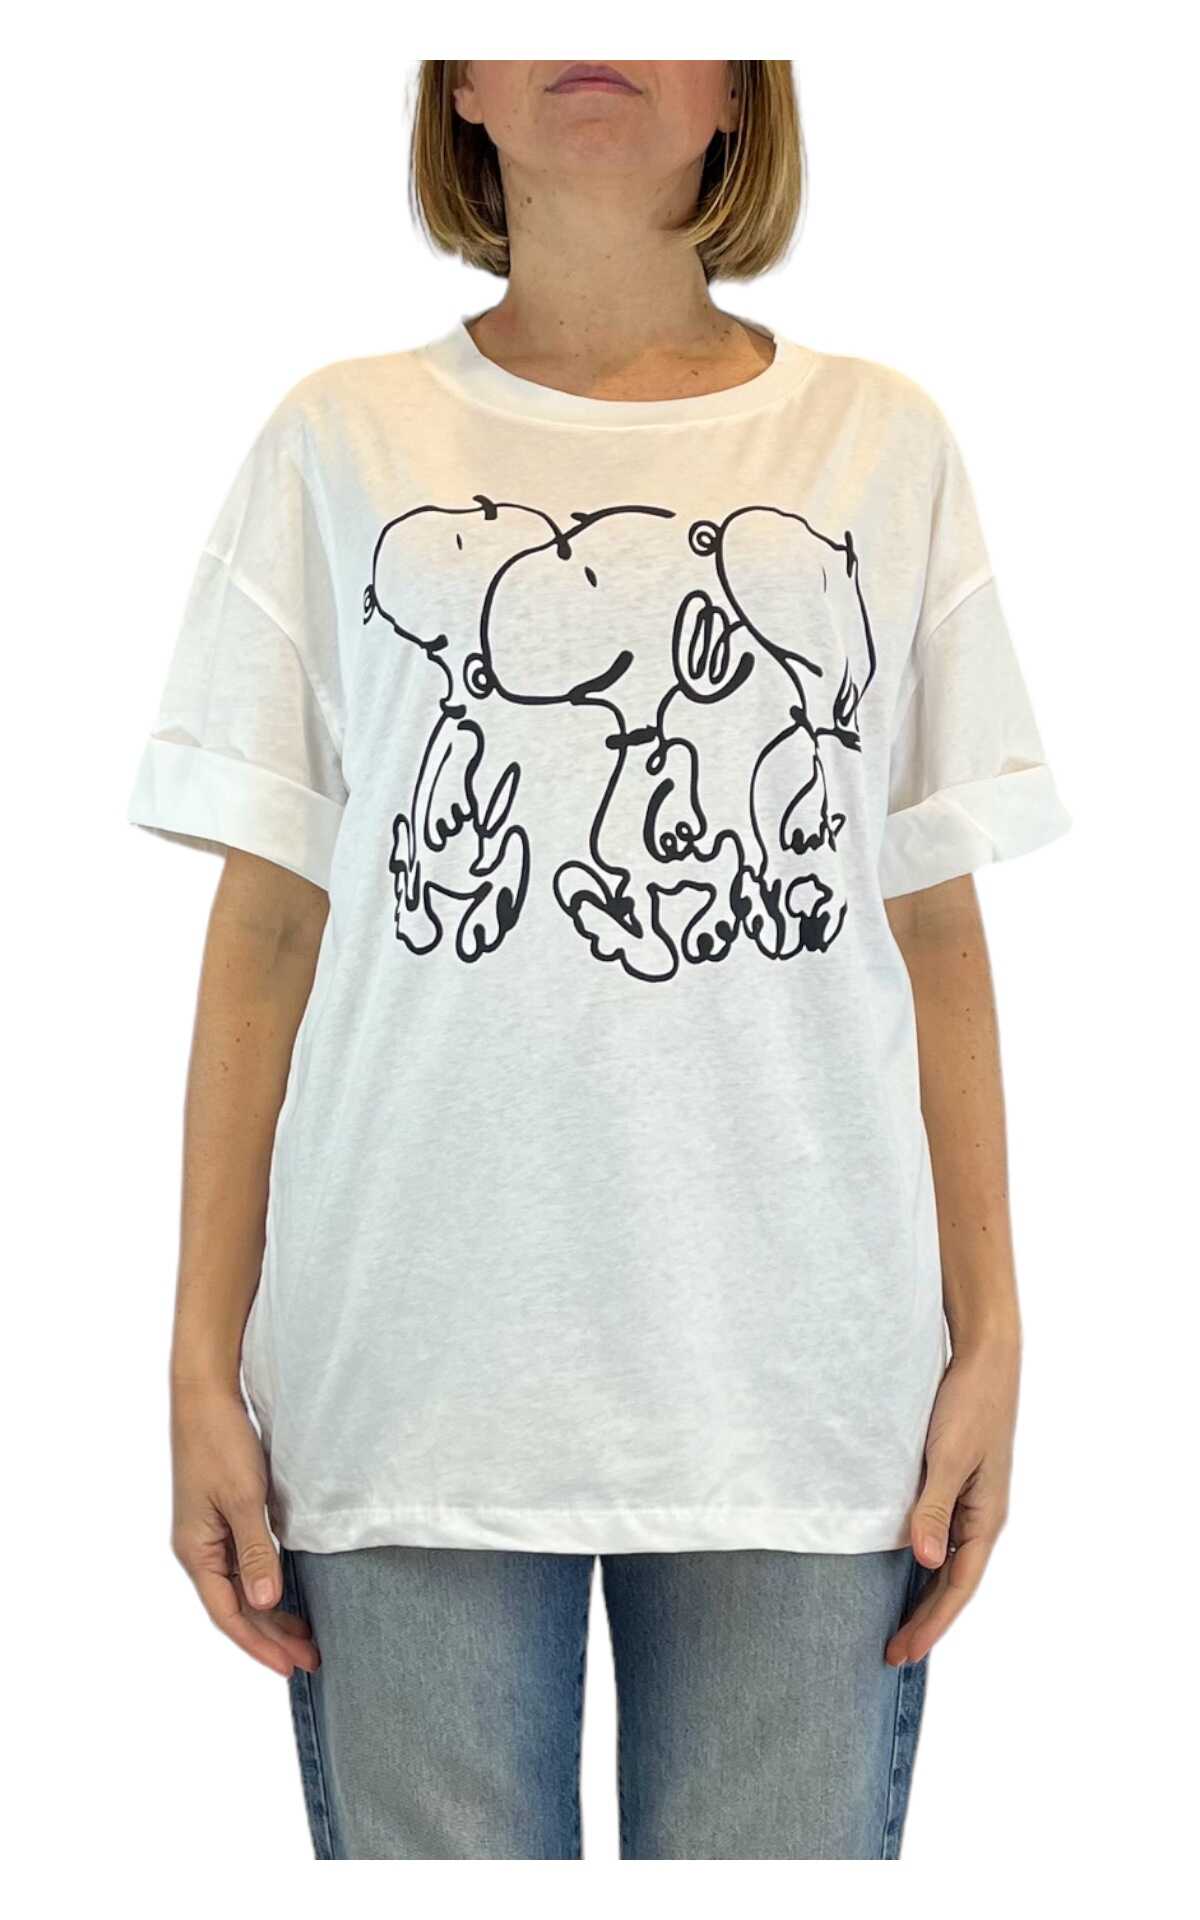 Off-On - T-shirt over - Snoopy grandi